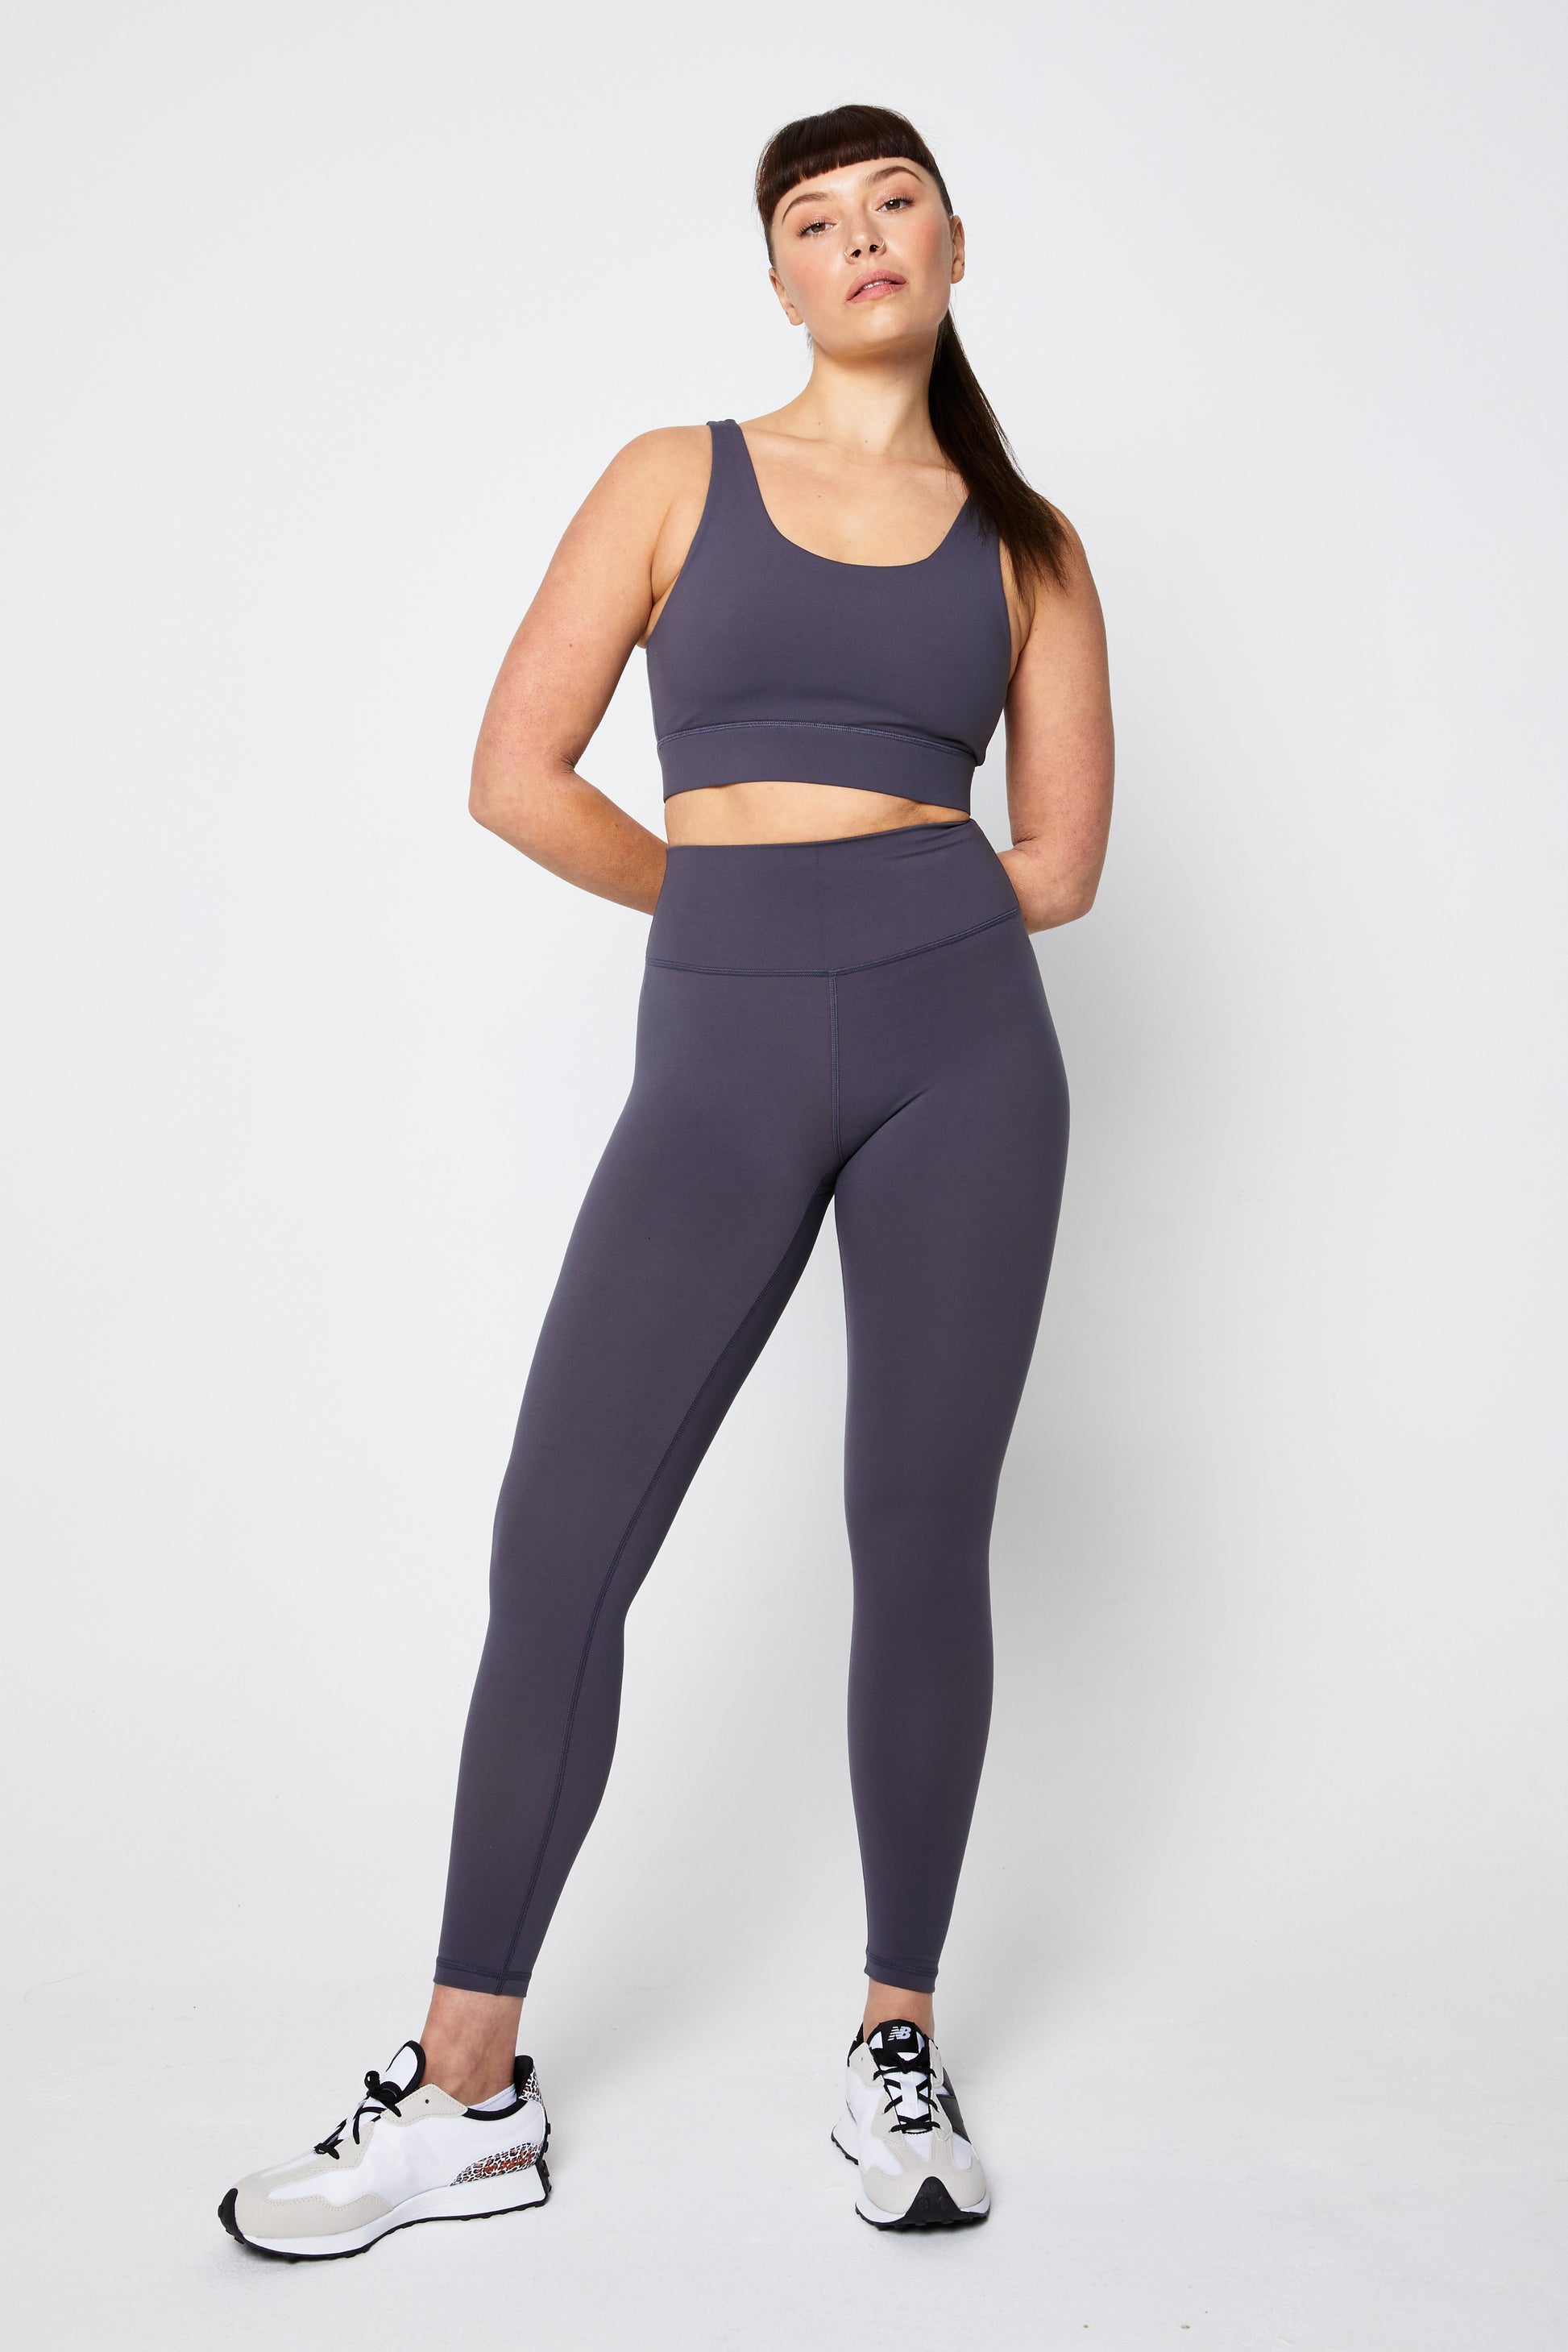 Purple Grey Lululemon Leggings For Sale In Nc | International Society of  Precision Agriculture